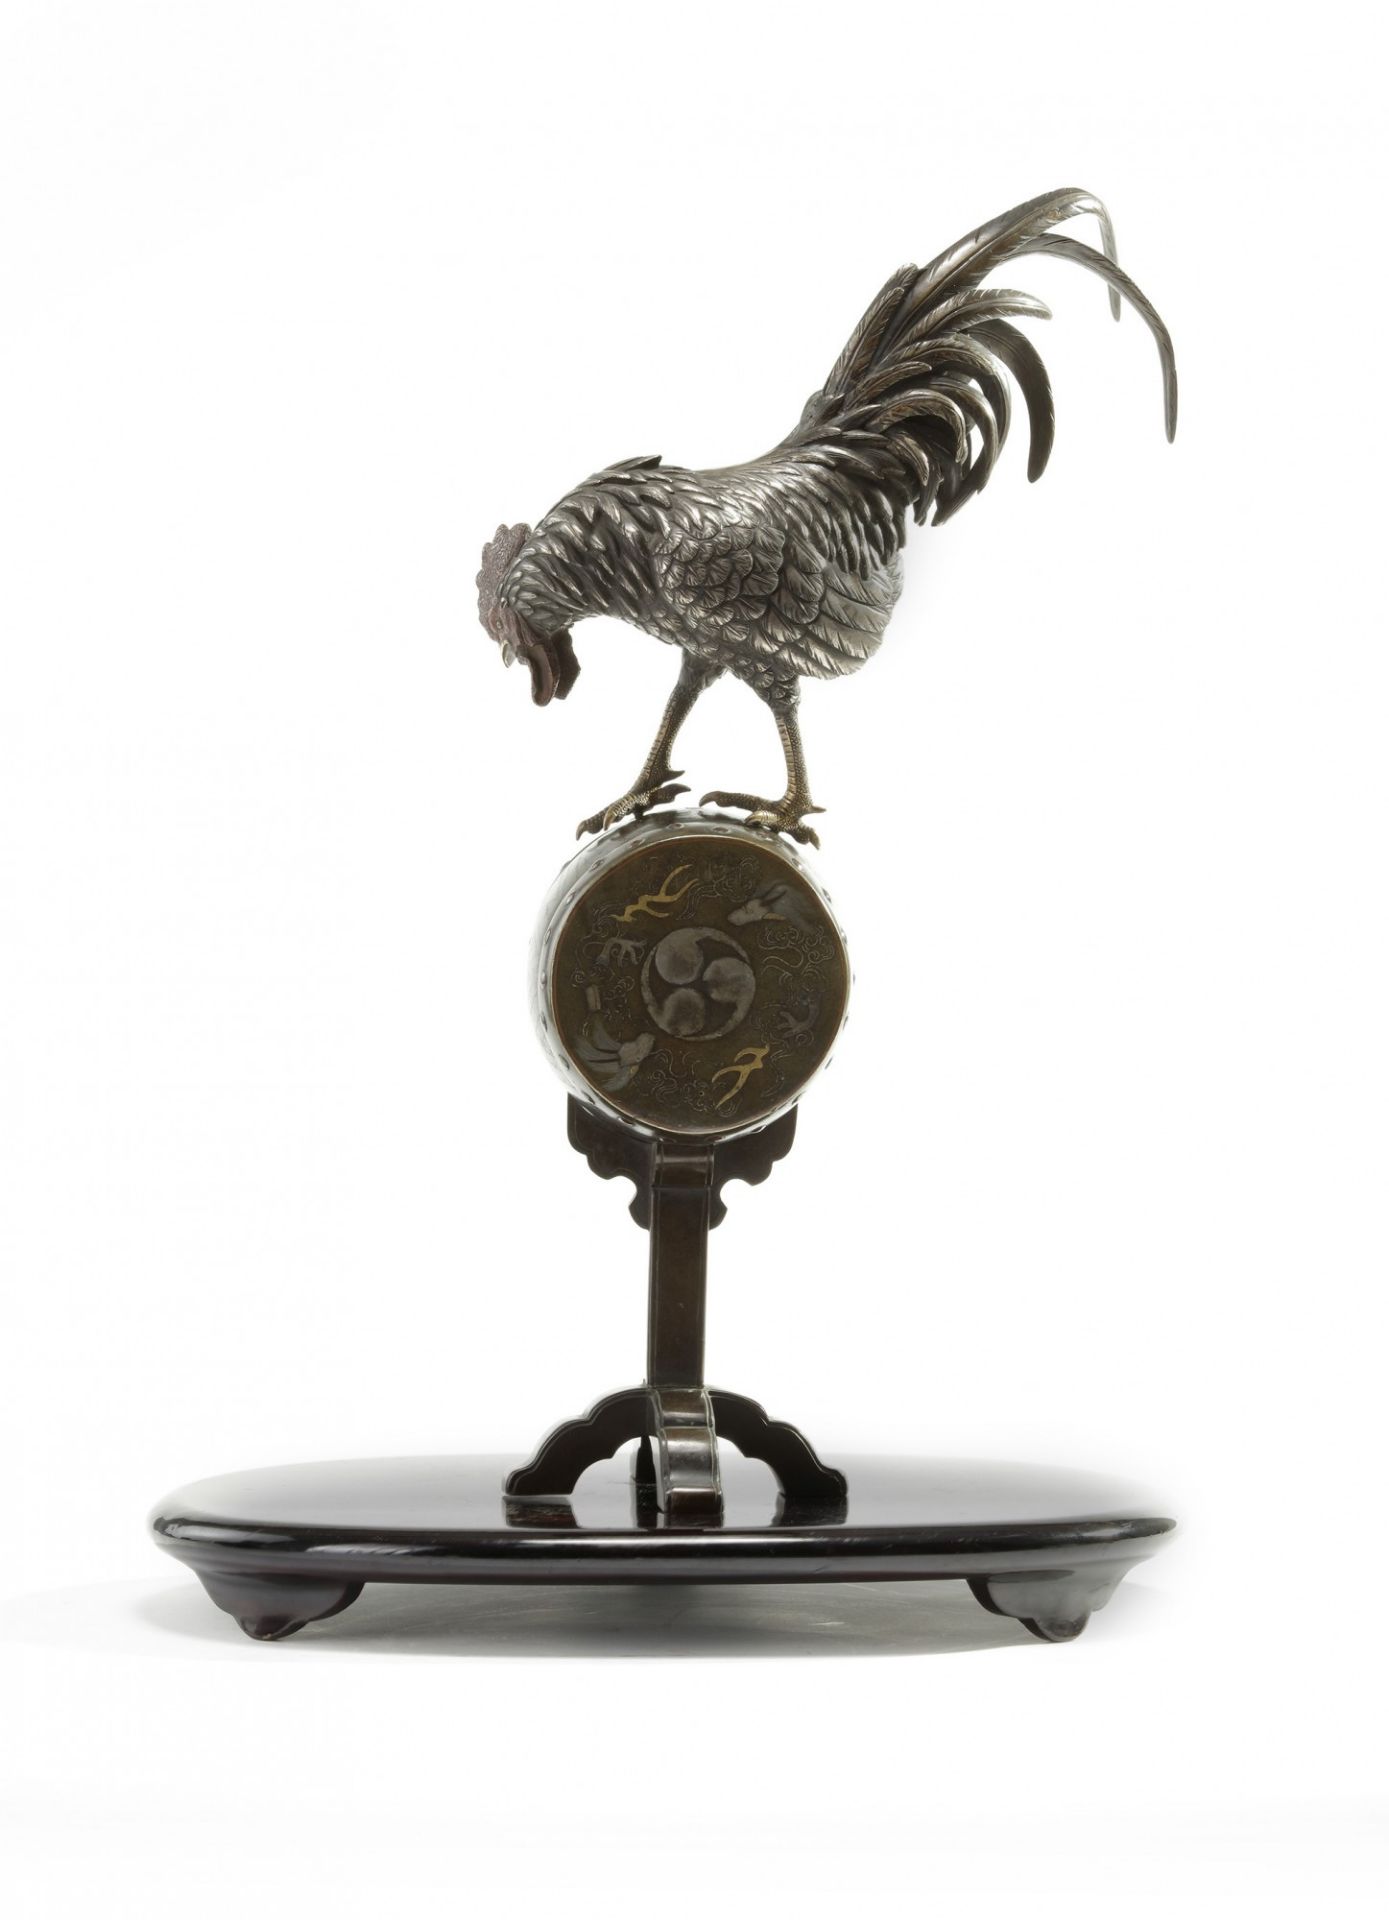 A Japanese figure of a rooster on a stand - Image 2 of 4